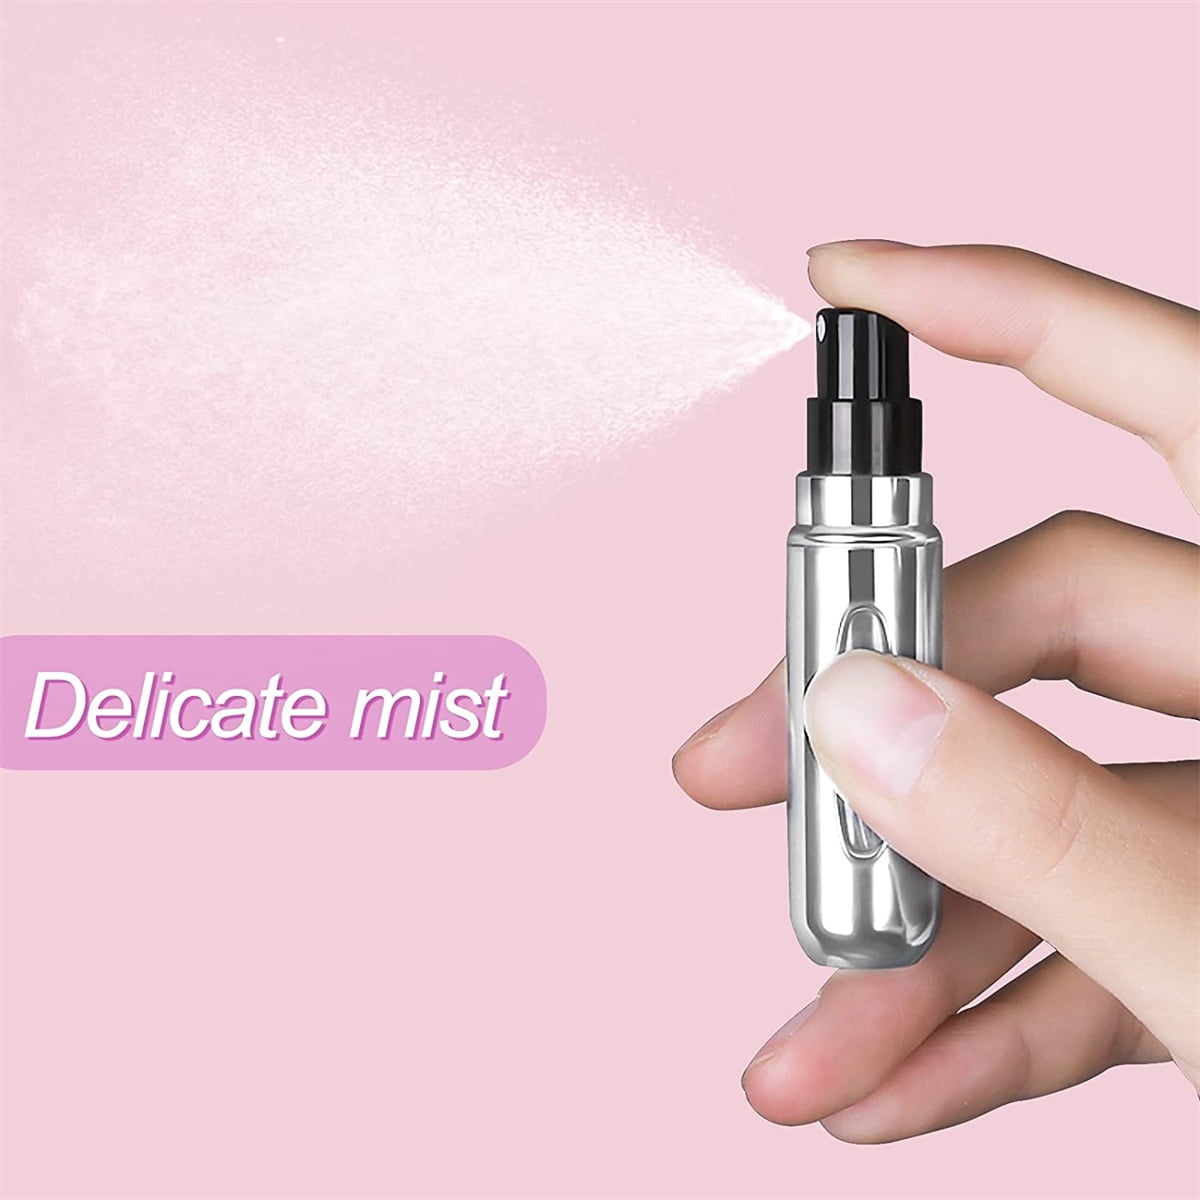 HINNASWA Censung Portable Mini Refillable Perfume Empty Spray Bottle Atomizer Pump Case for Traveling and Outgoing 3 Pcs Pack of 5ml, Adult Unisex